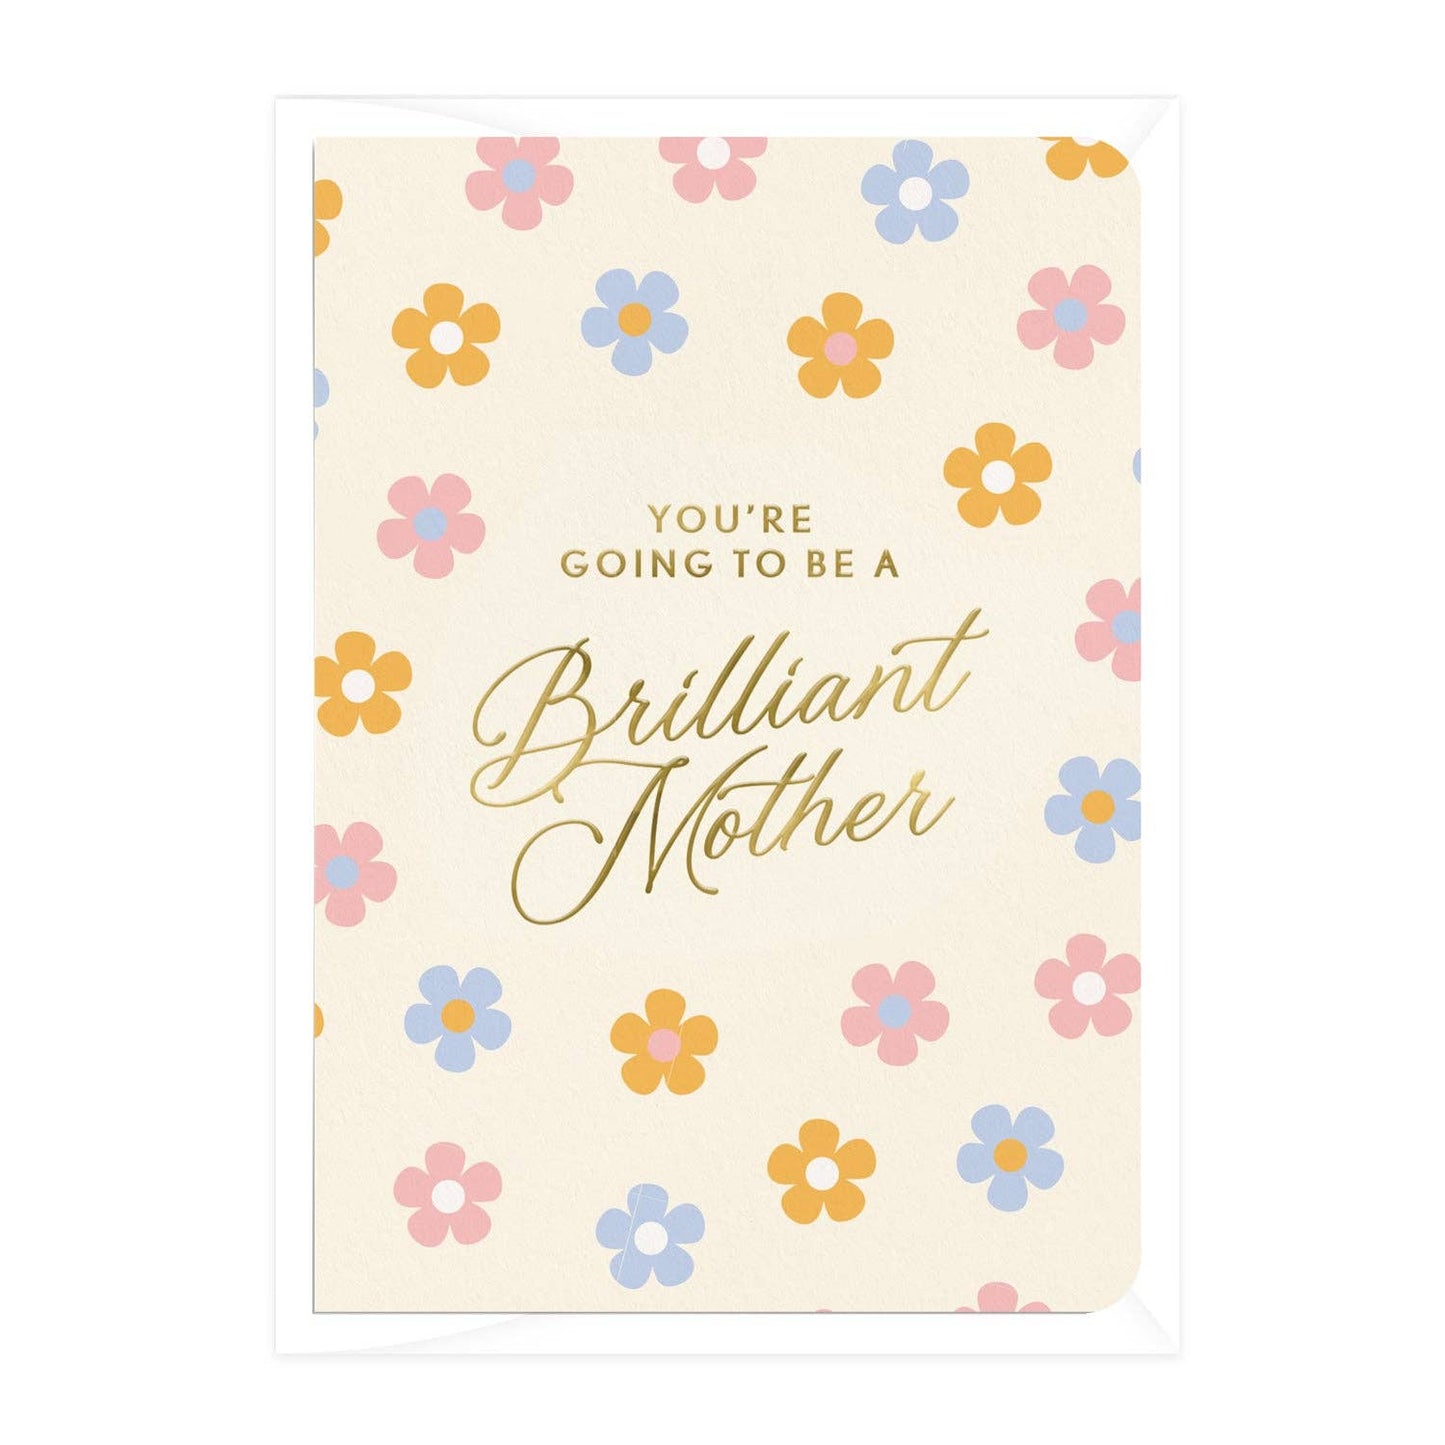 'Brilliant Mother' Baby Shower Greeting Card